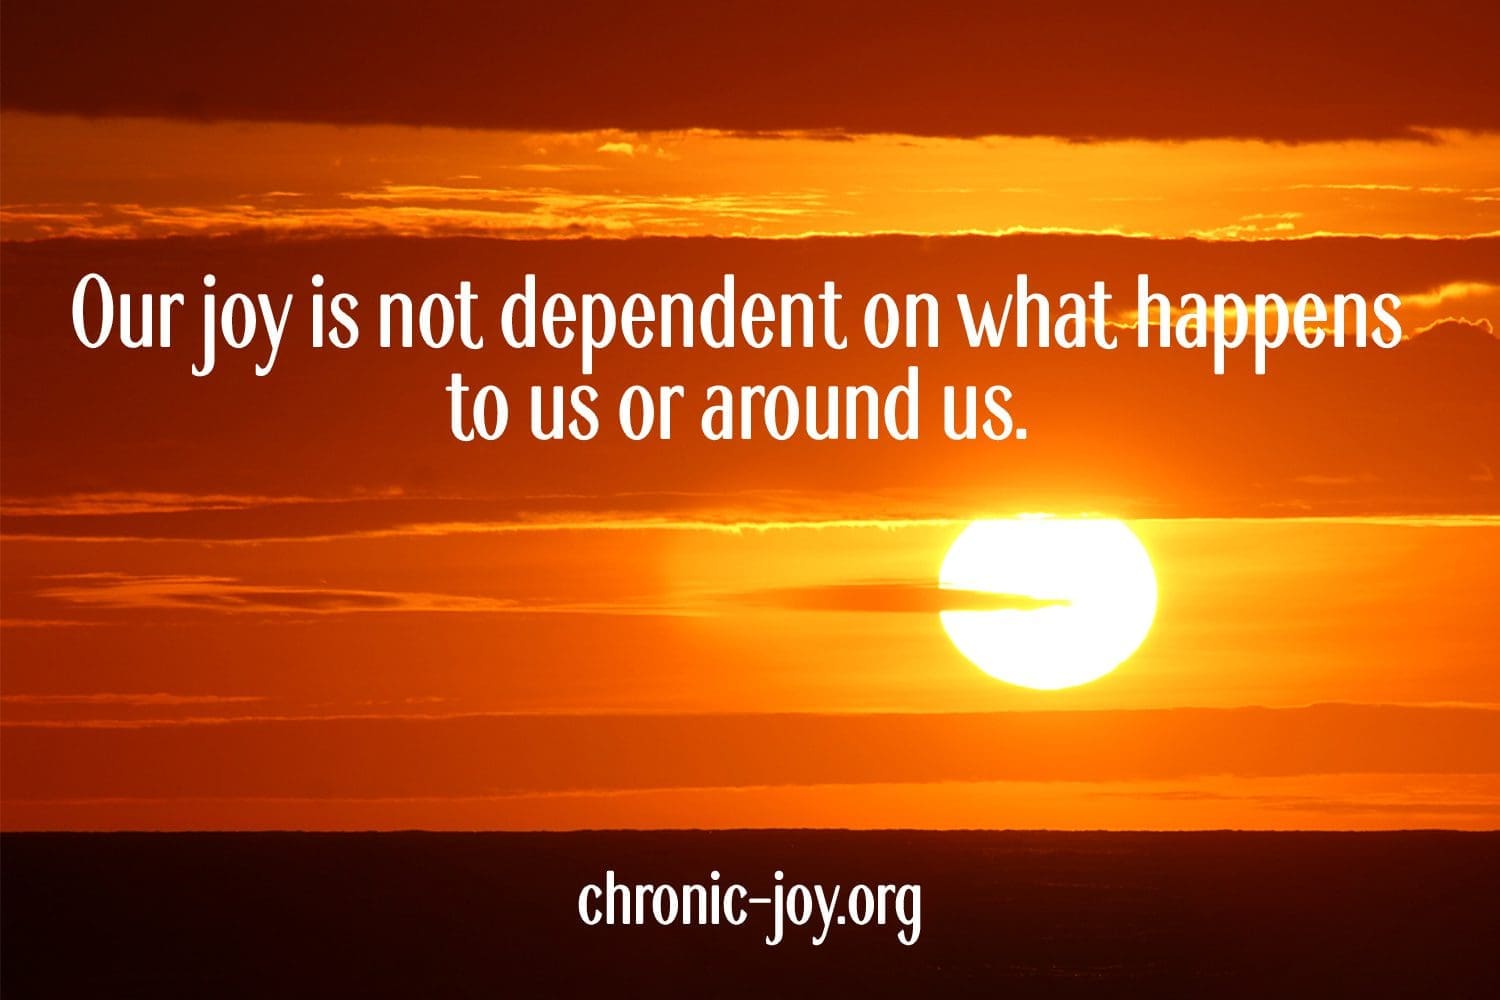 Our joy is not dependent on what happens to us or around us.